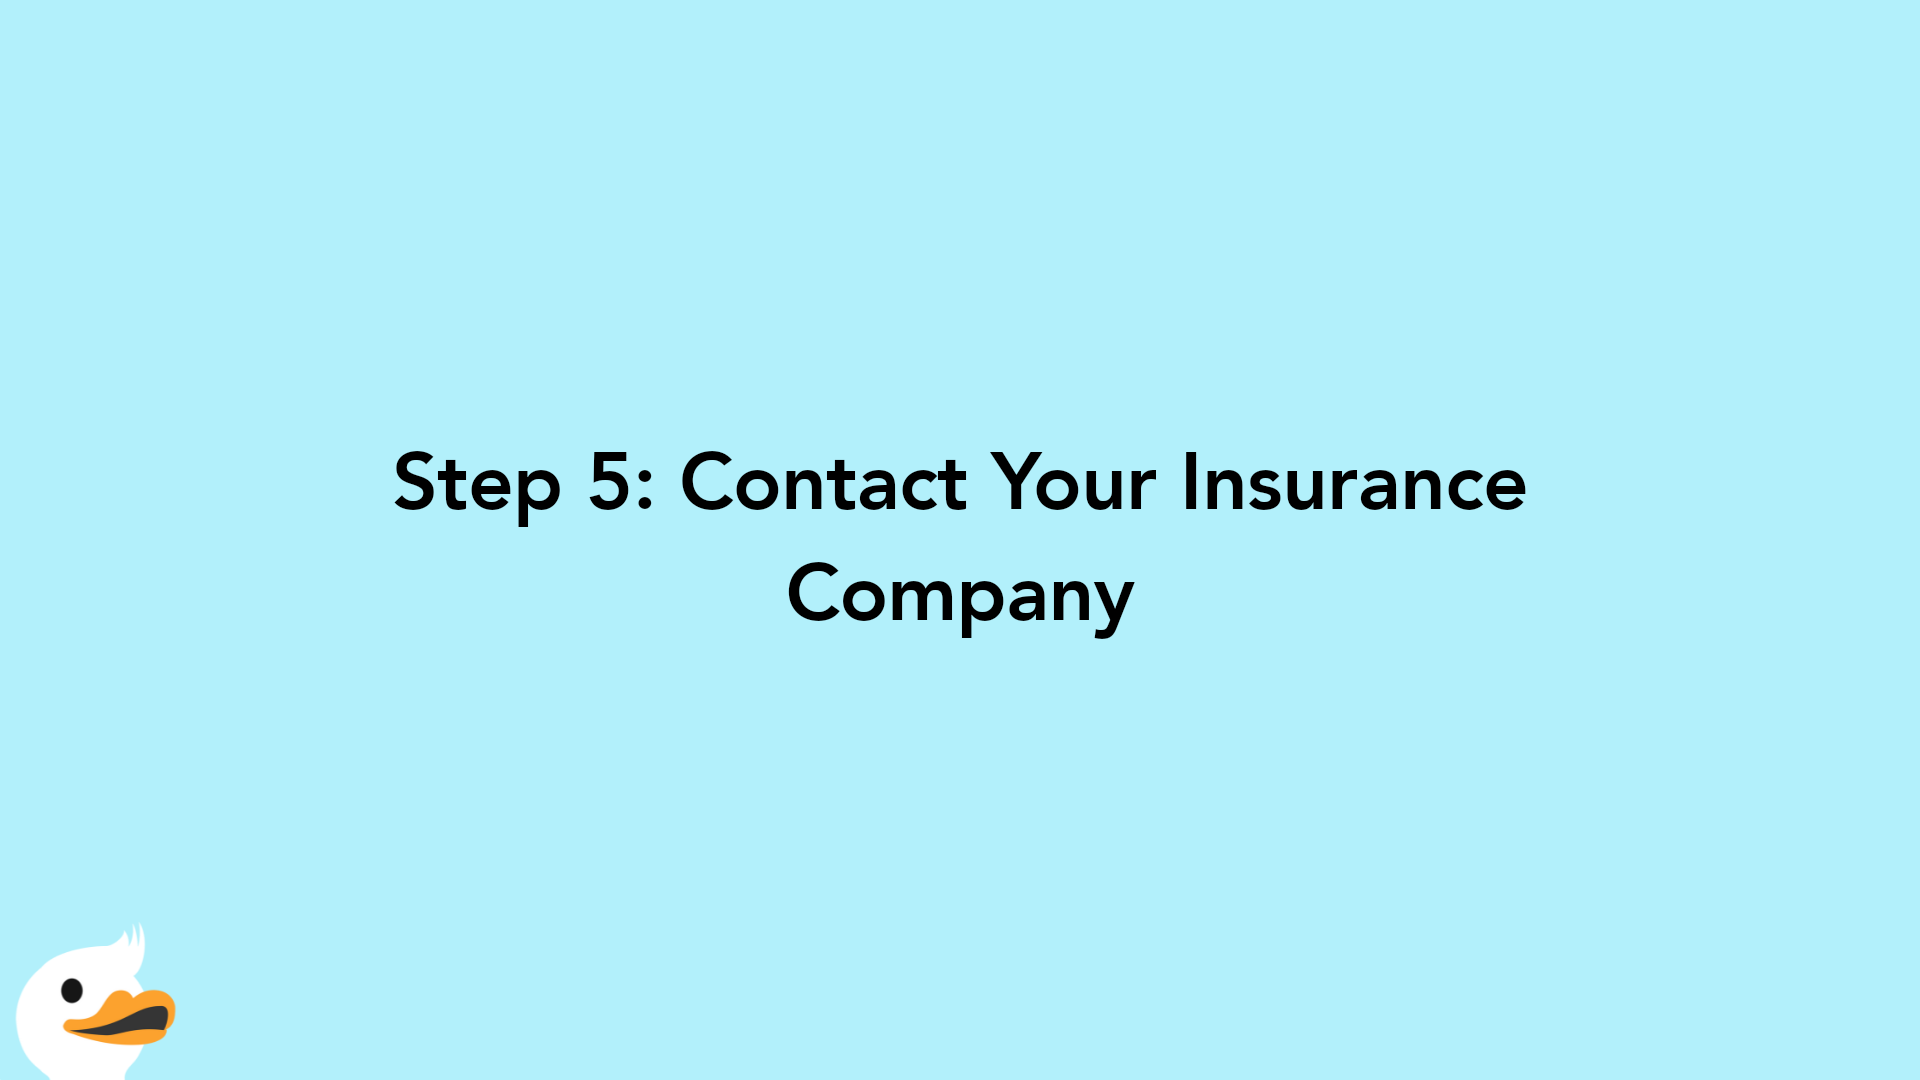 Step 5: Contact Your Insurance Company